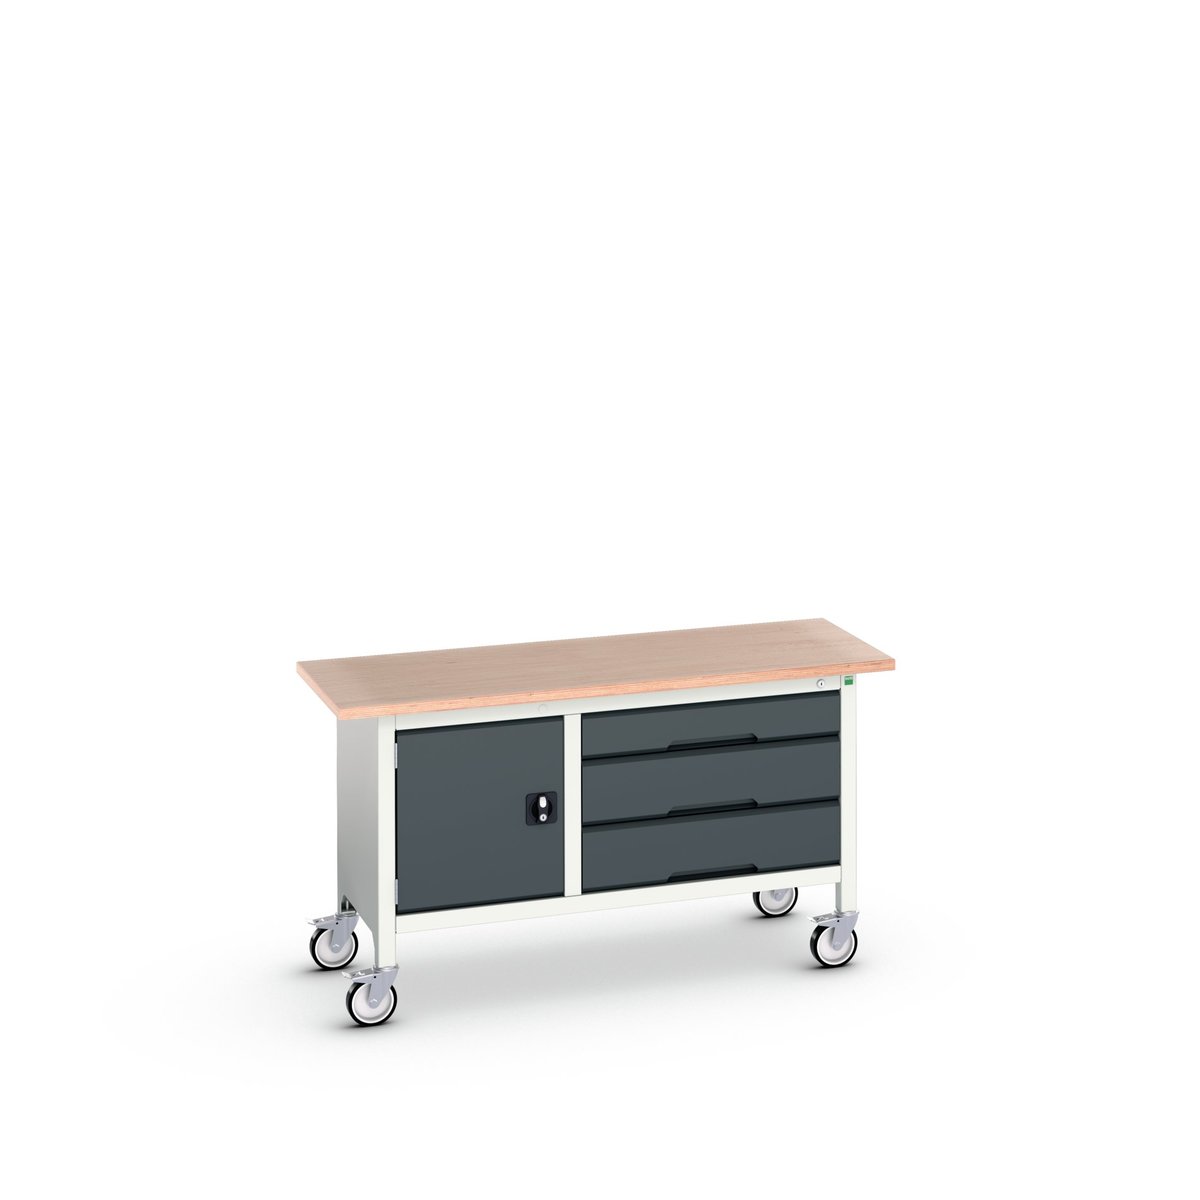 16923214. - verso mobile storage bench (mpx)